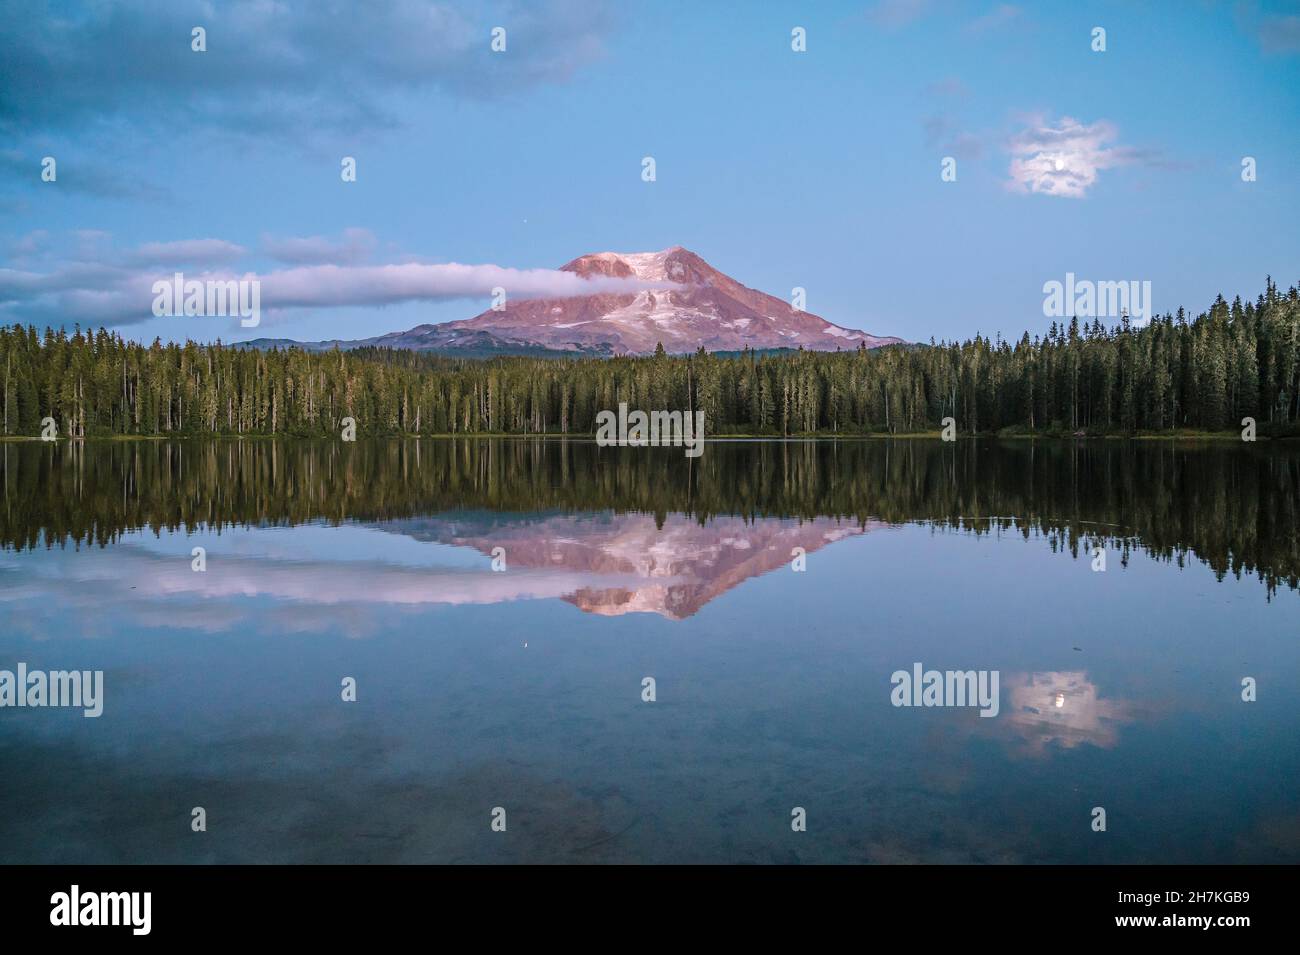 Mount Adams reflecting in a lake at night Stock Photo